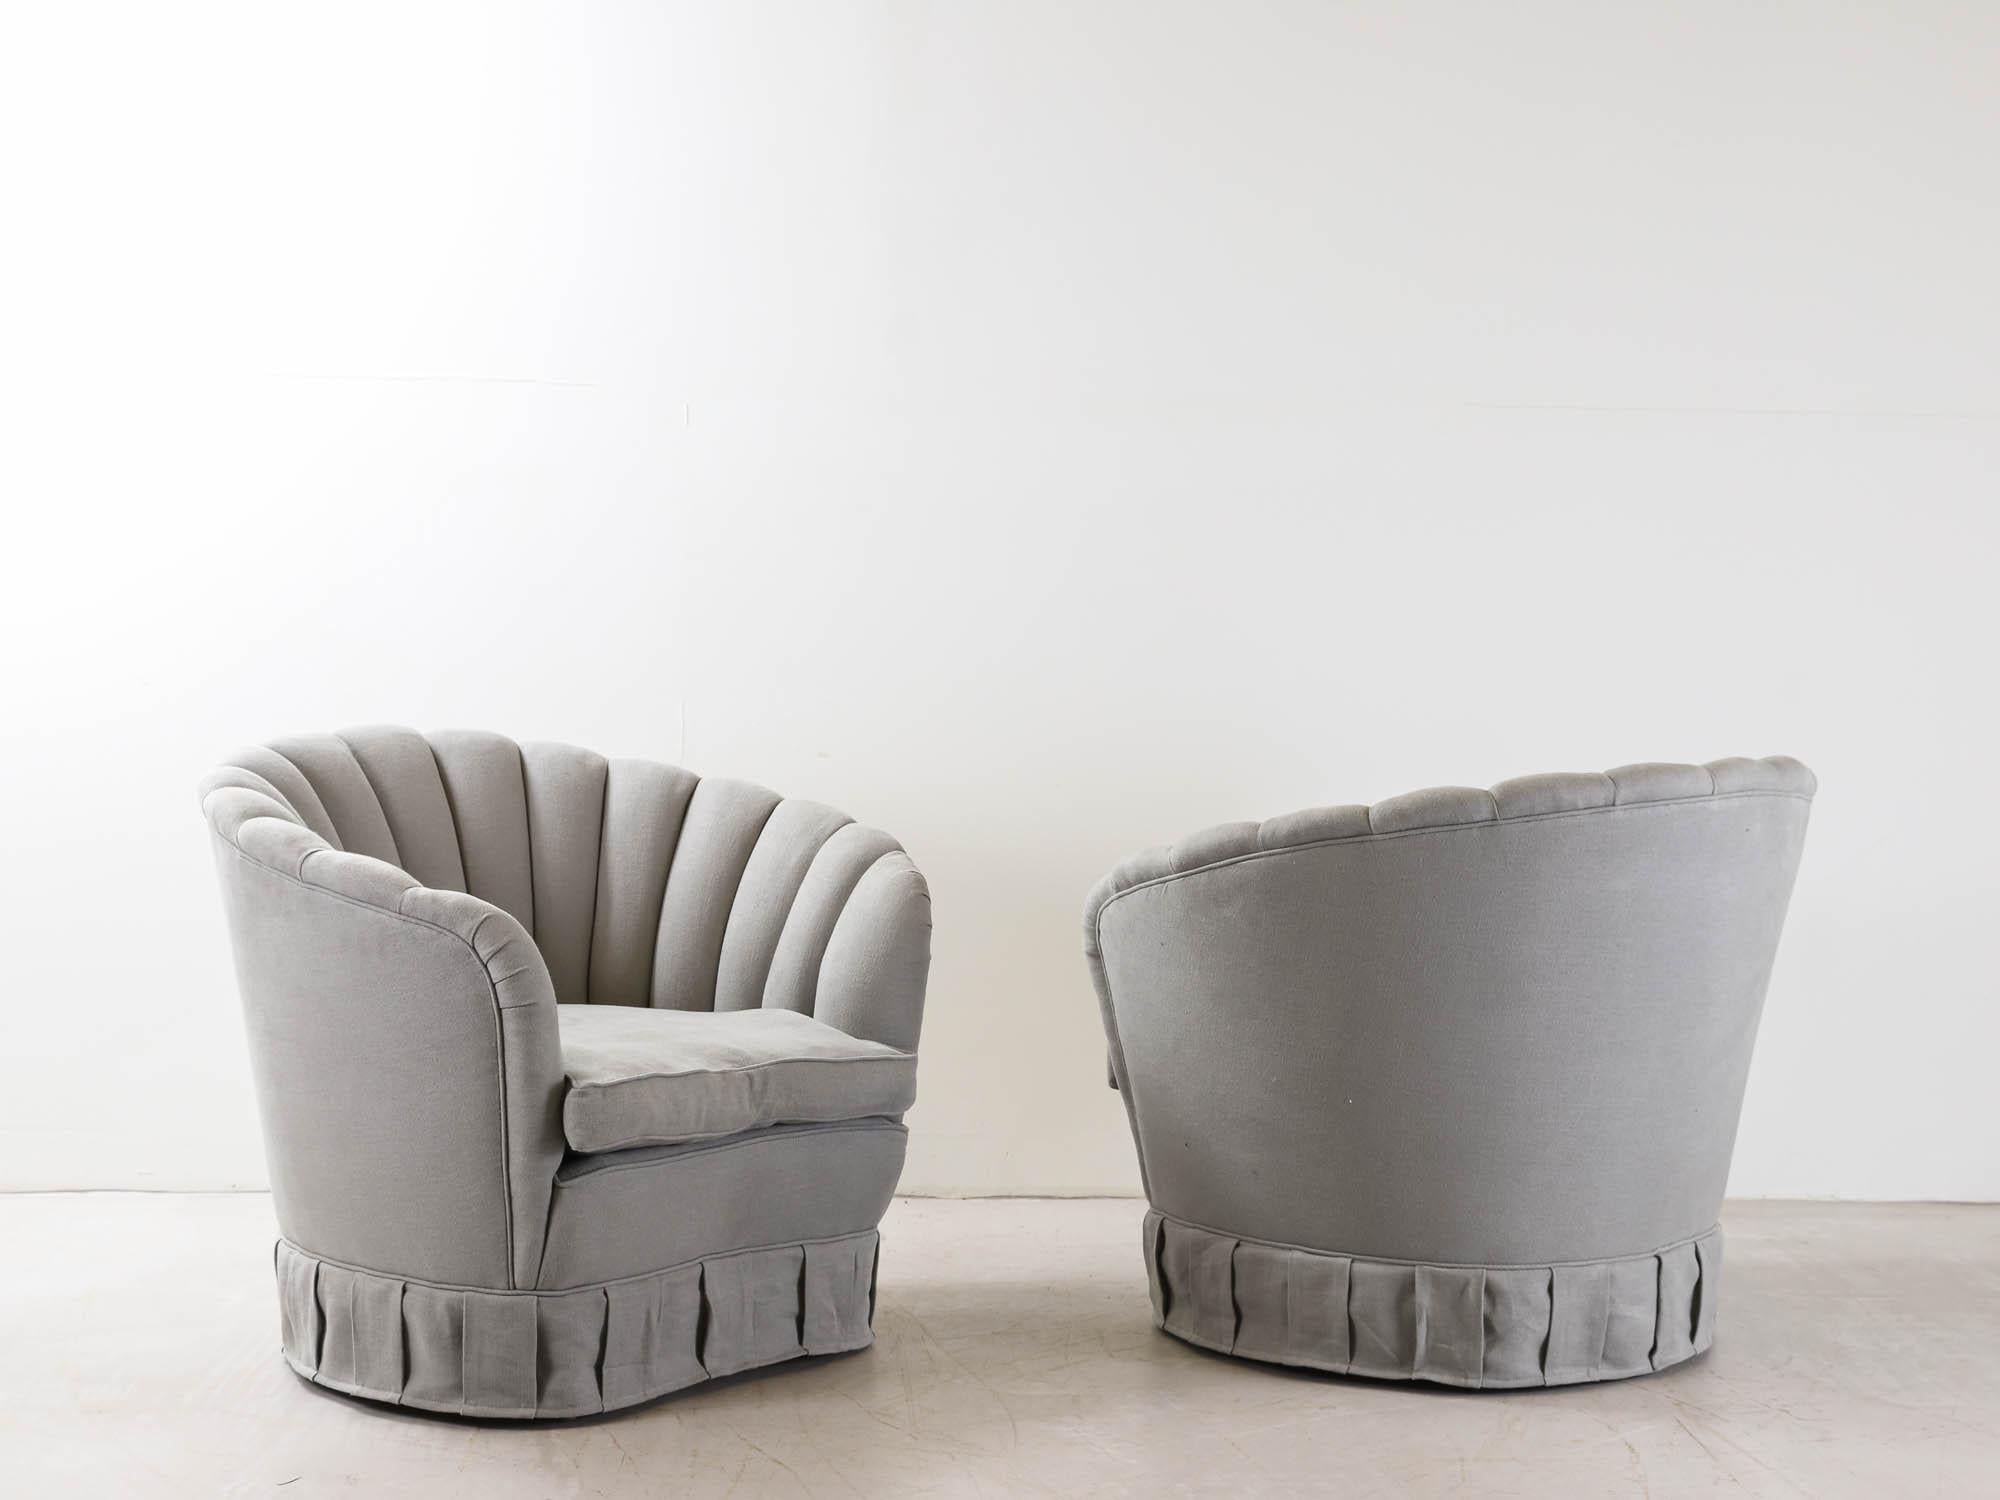 A pair of 1940s Gio Ponti shell chairs, reupholstered in a grey blue linen, retaining the original cushions and structure.

Giovanni 